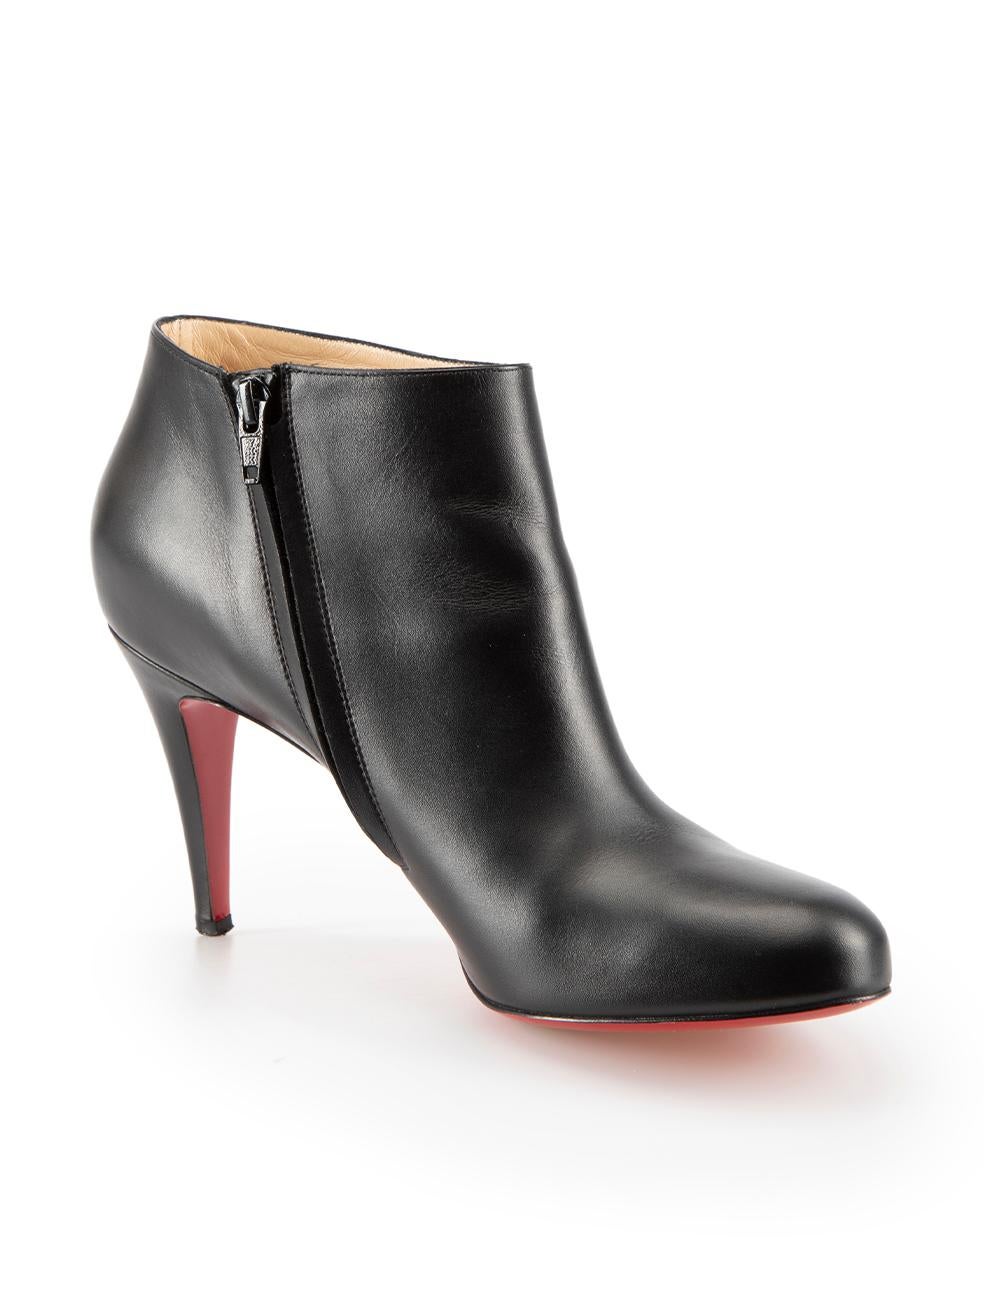 CONDITION is Very good. Minimal wear to boots is evident. Minimal wear to upper with hardly any creasing or blemishes seen however some mild impact to soles on this used Christian Louboutin designer resale item.



Details


Black

Leather

Ankle